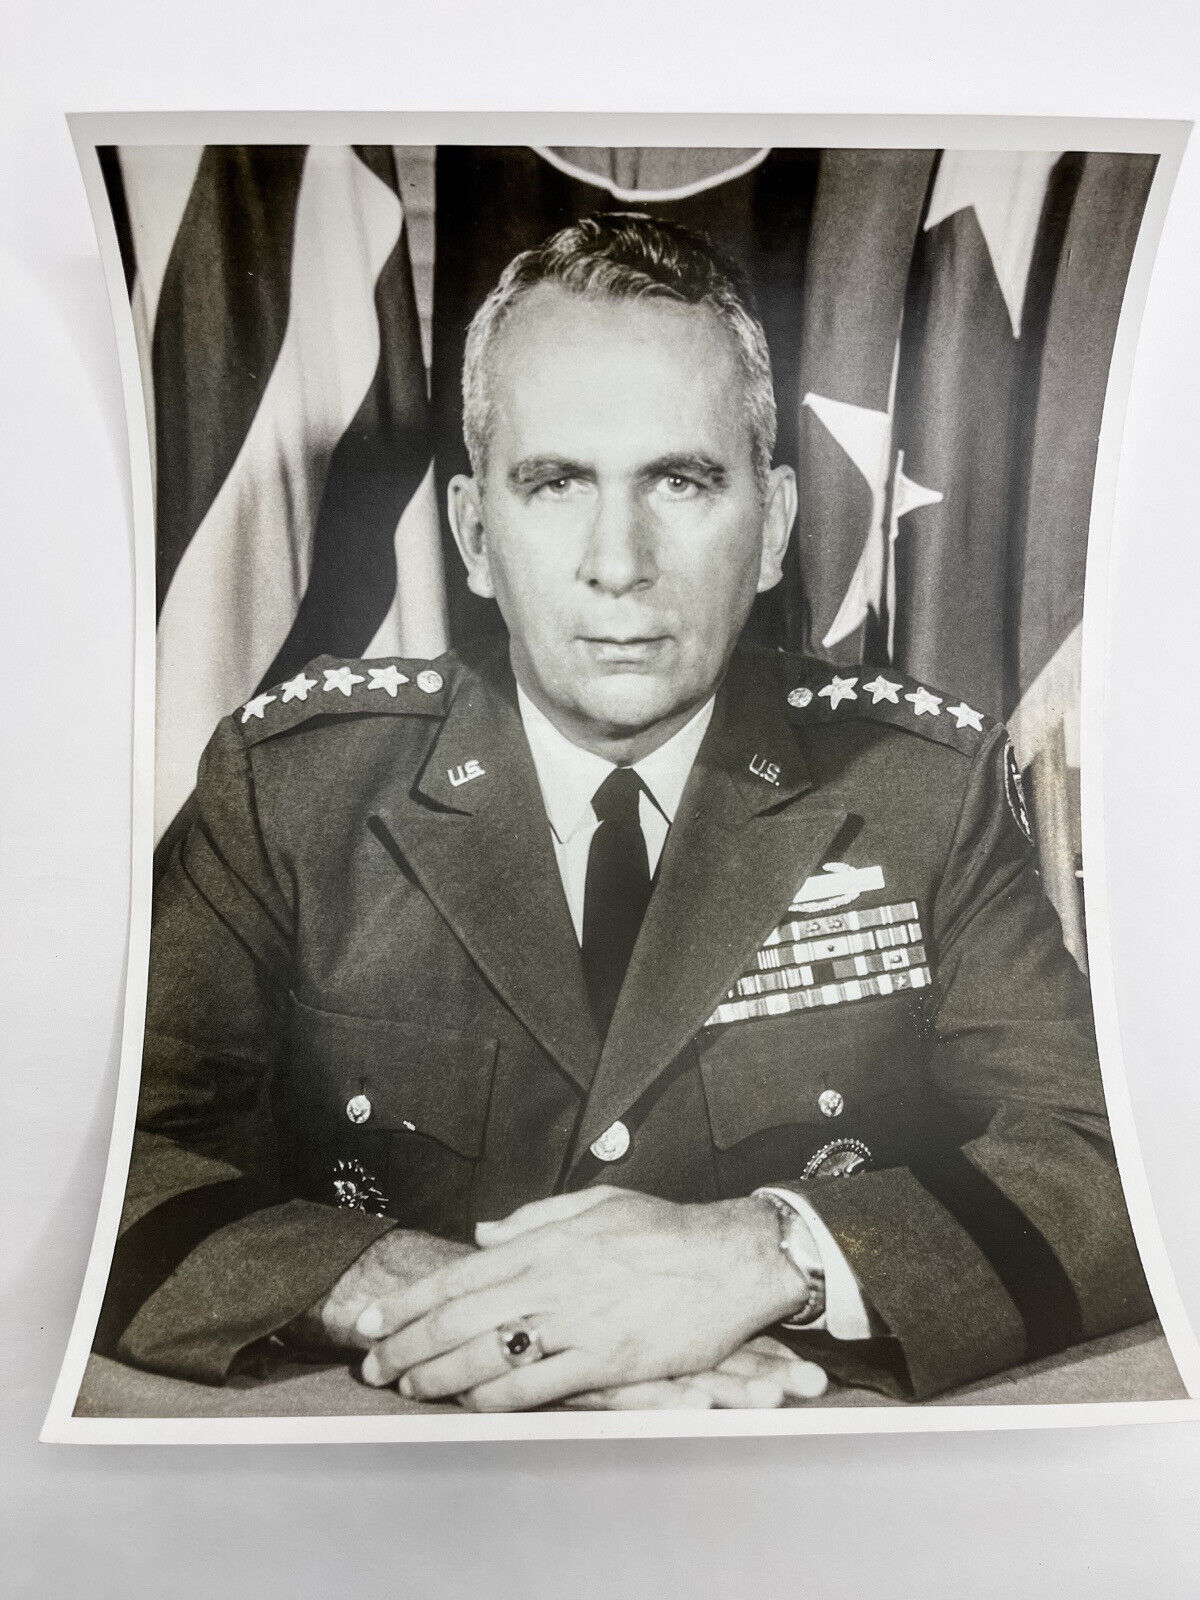 Sept 1968 Press Photo General Ralph Haines Jr., commander in chief, U.S. Army